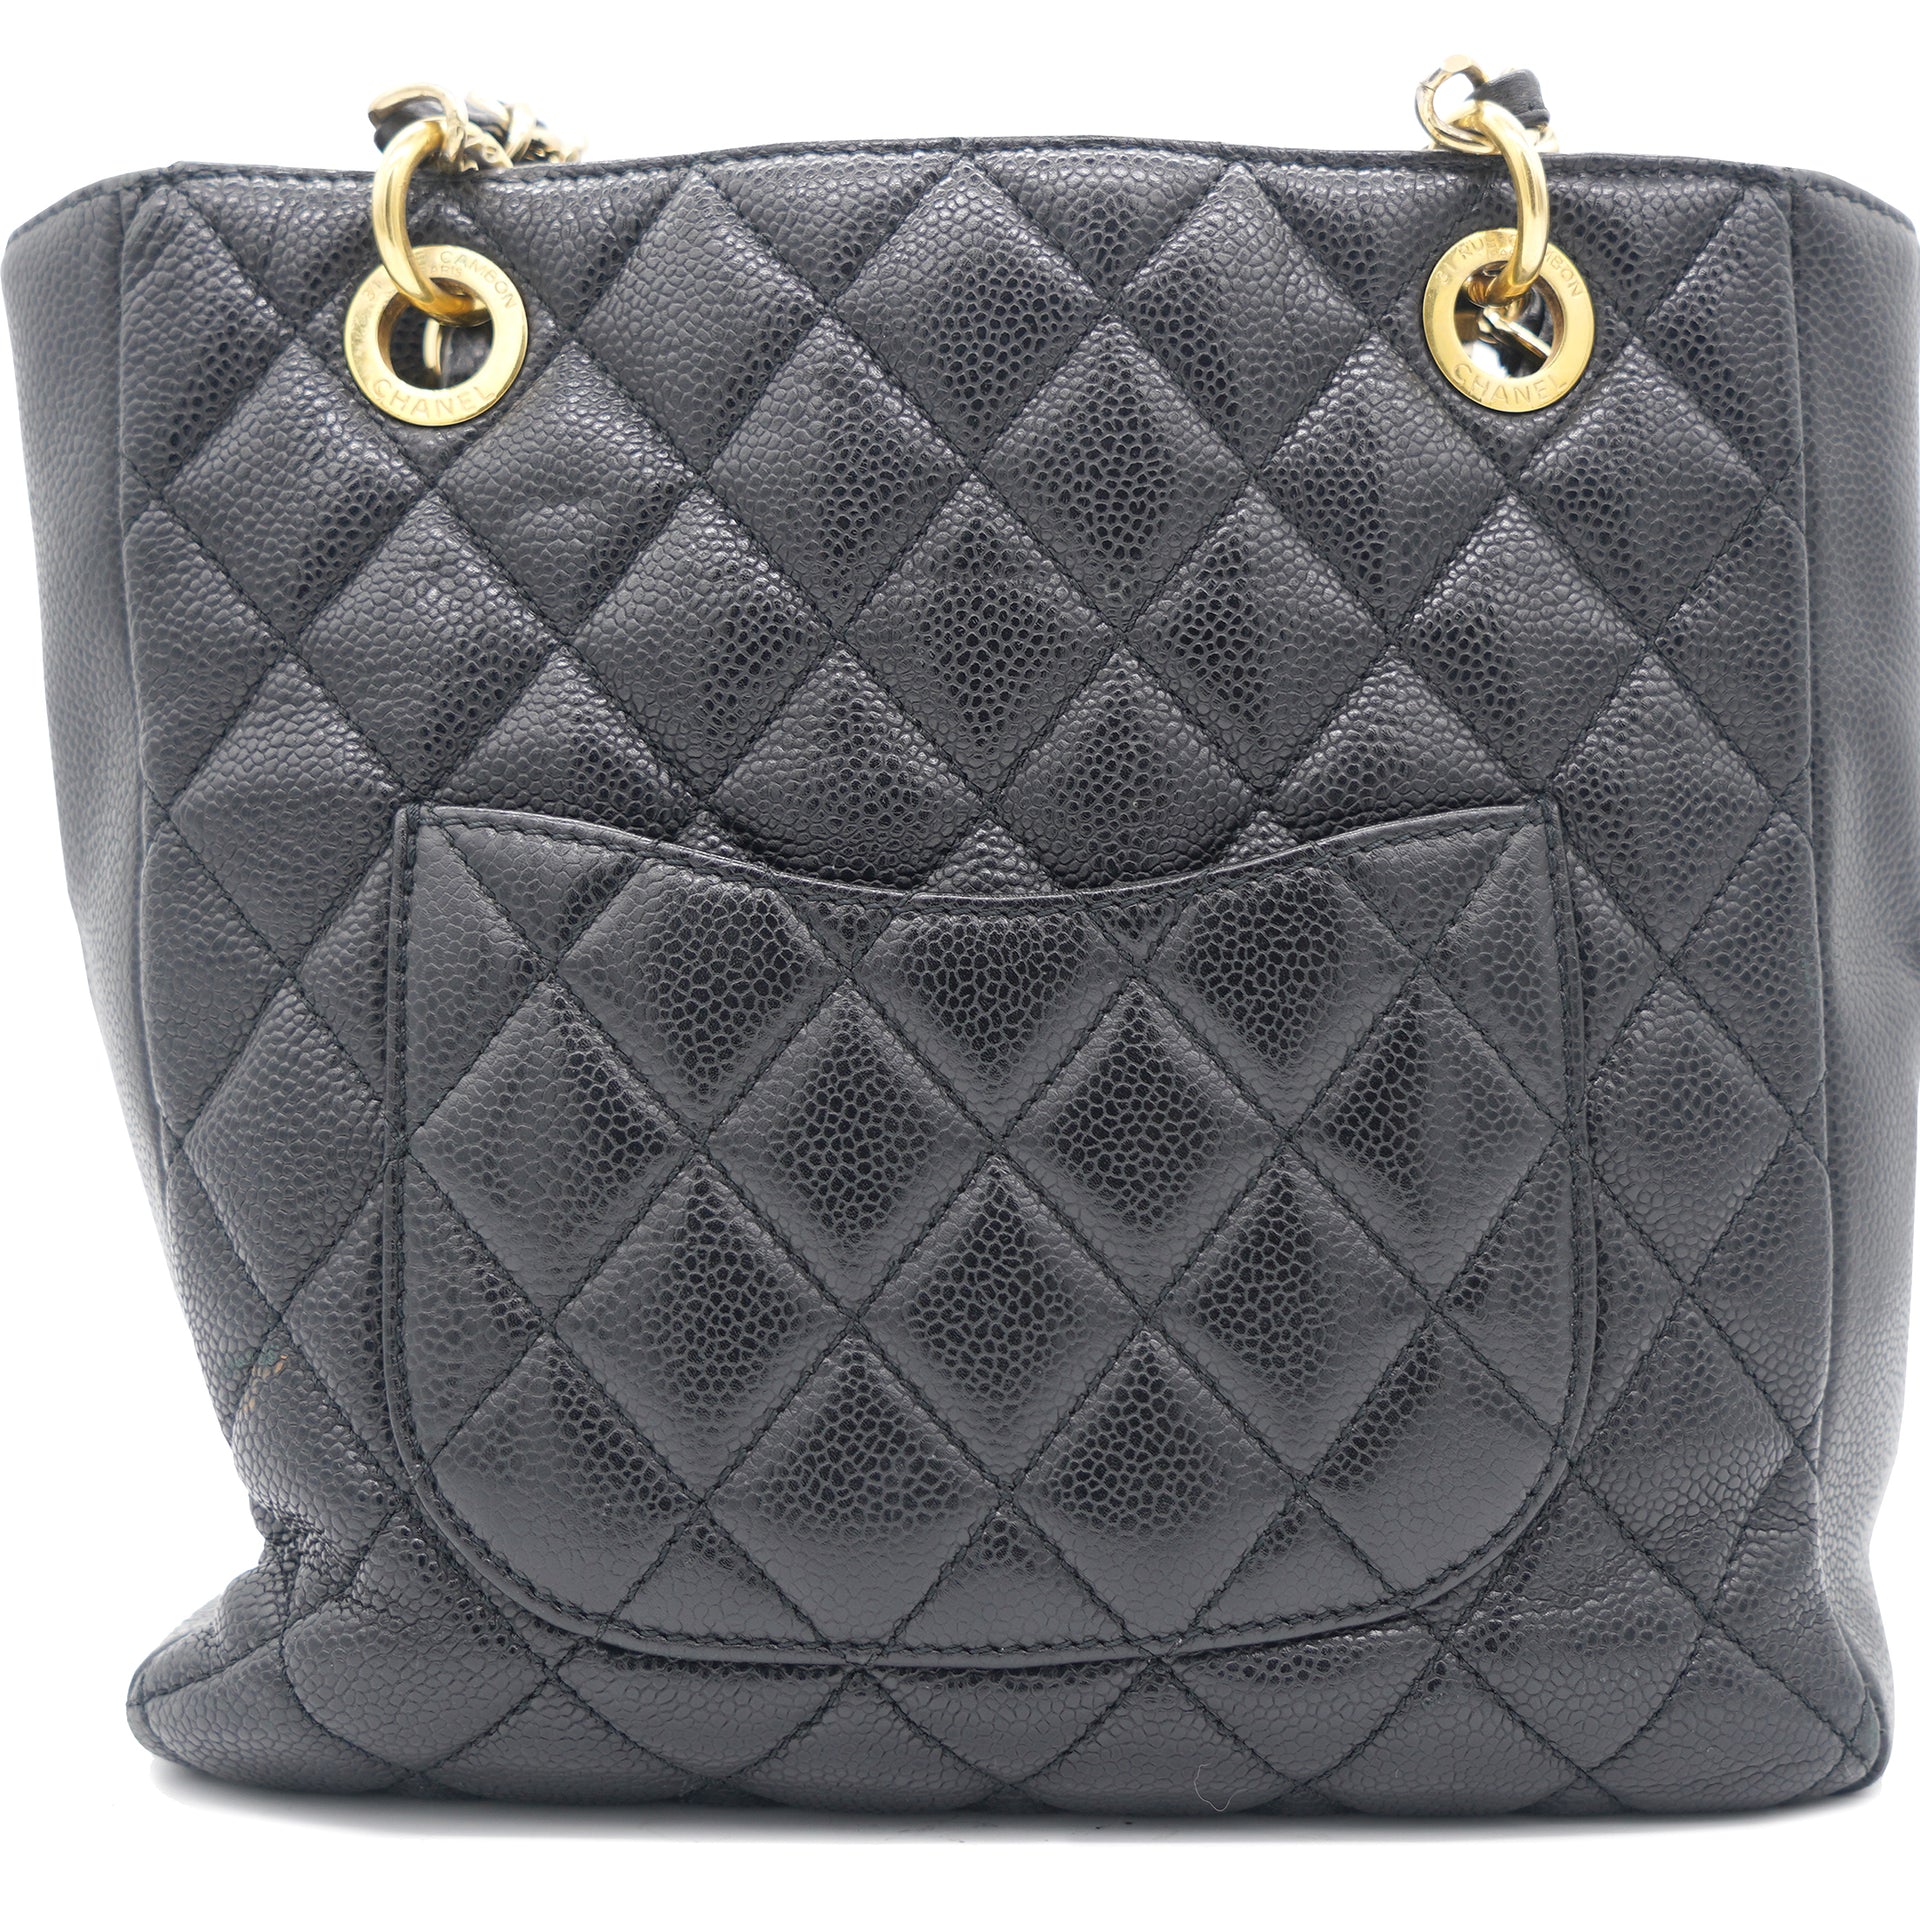 CHANEL LARGE QUILTED CAVIAR BLACK SHOPPING TOTE AUTHENTIC